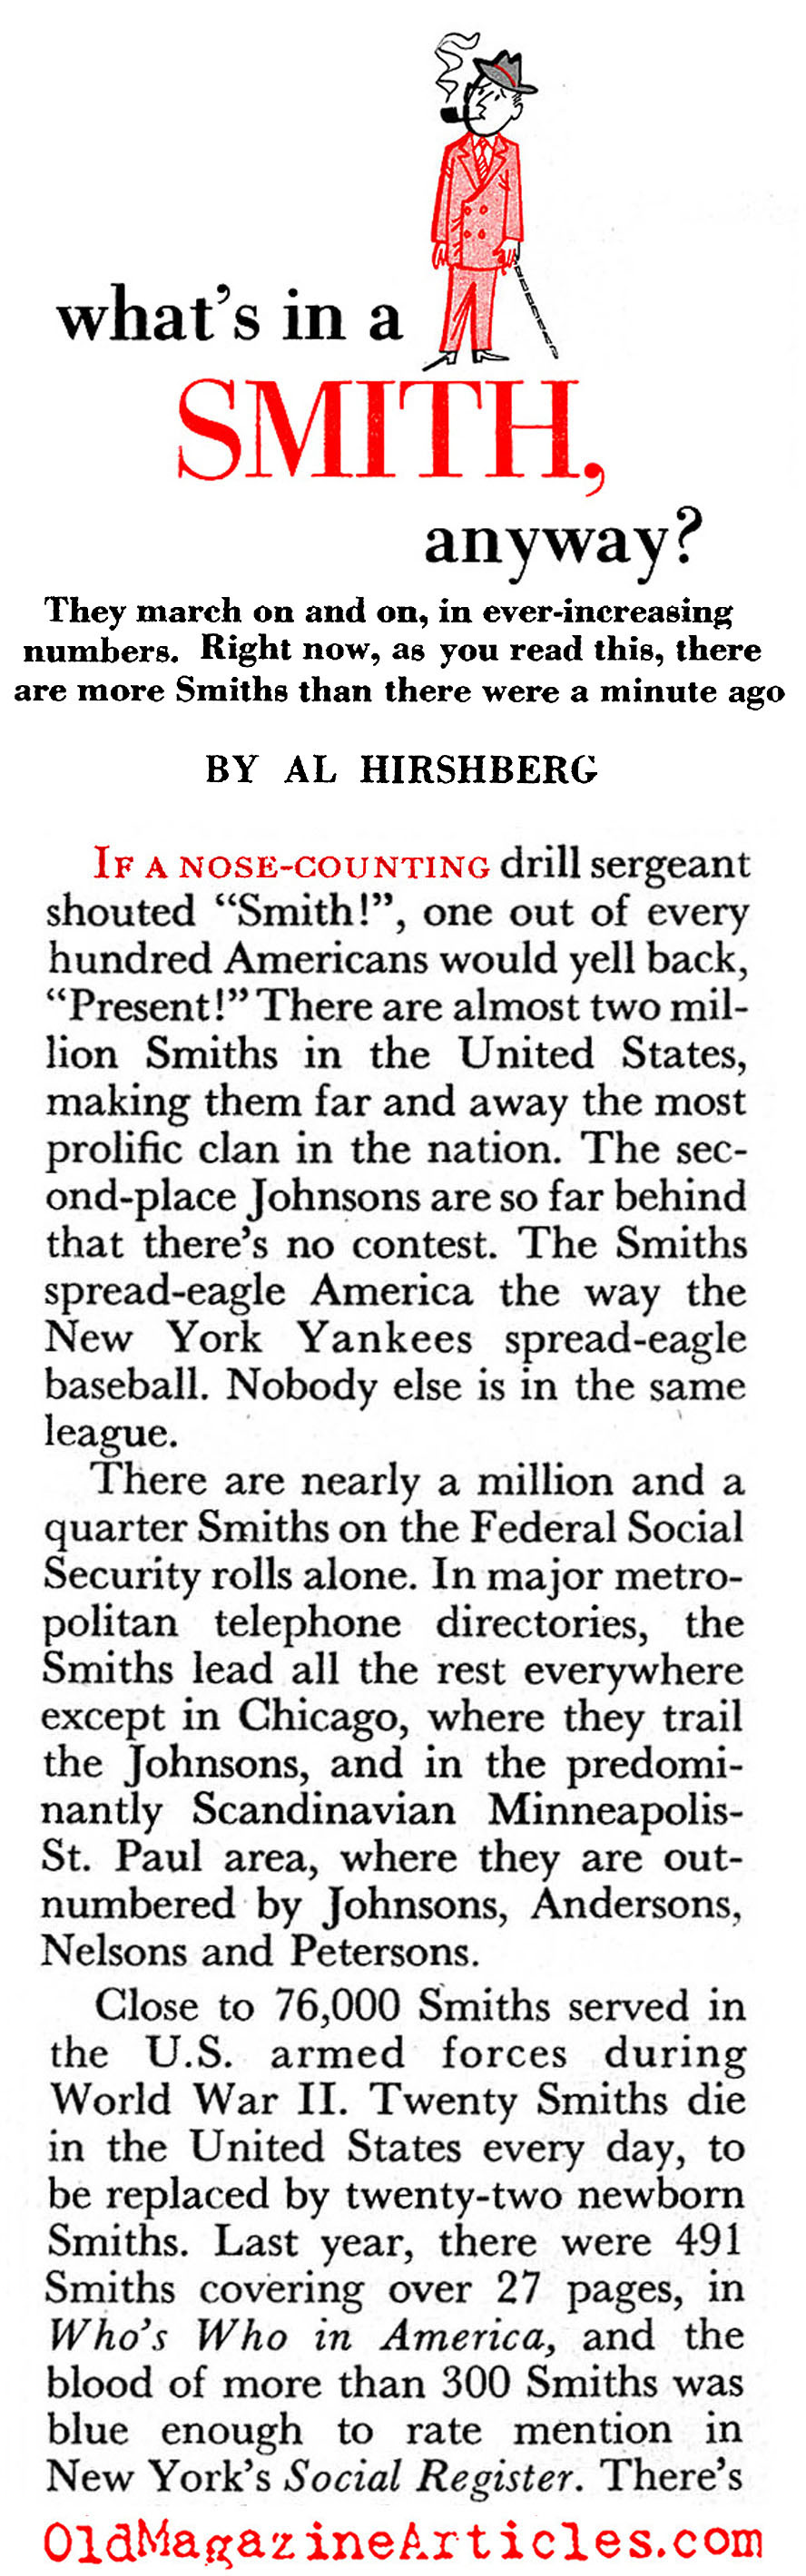 The Smiths in America (Pageant Magazine, 1959)